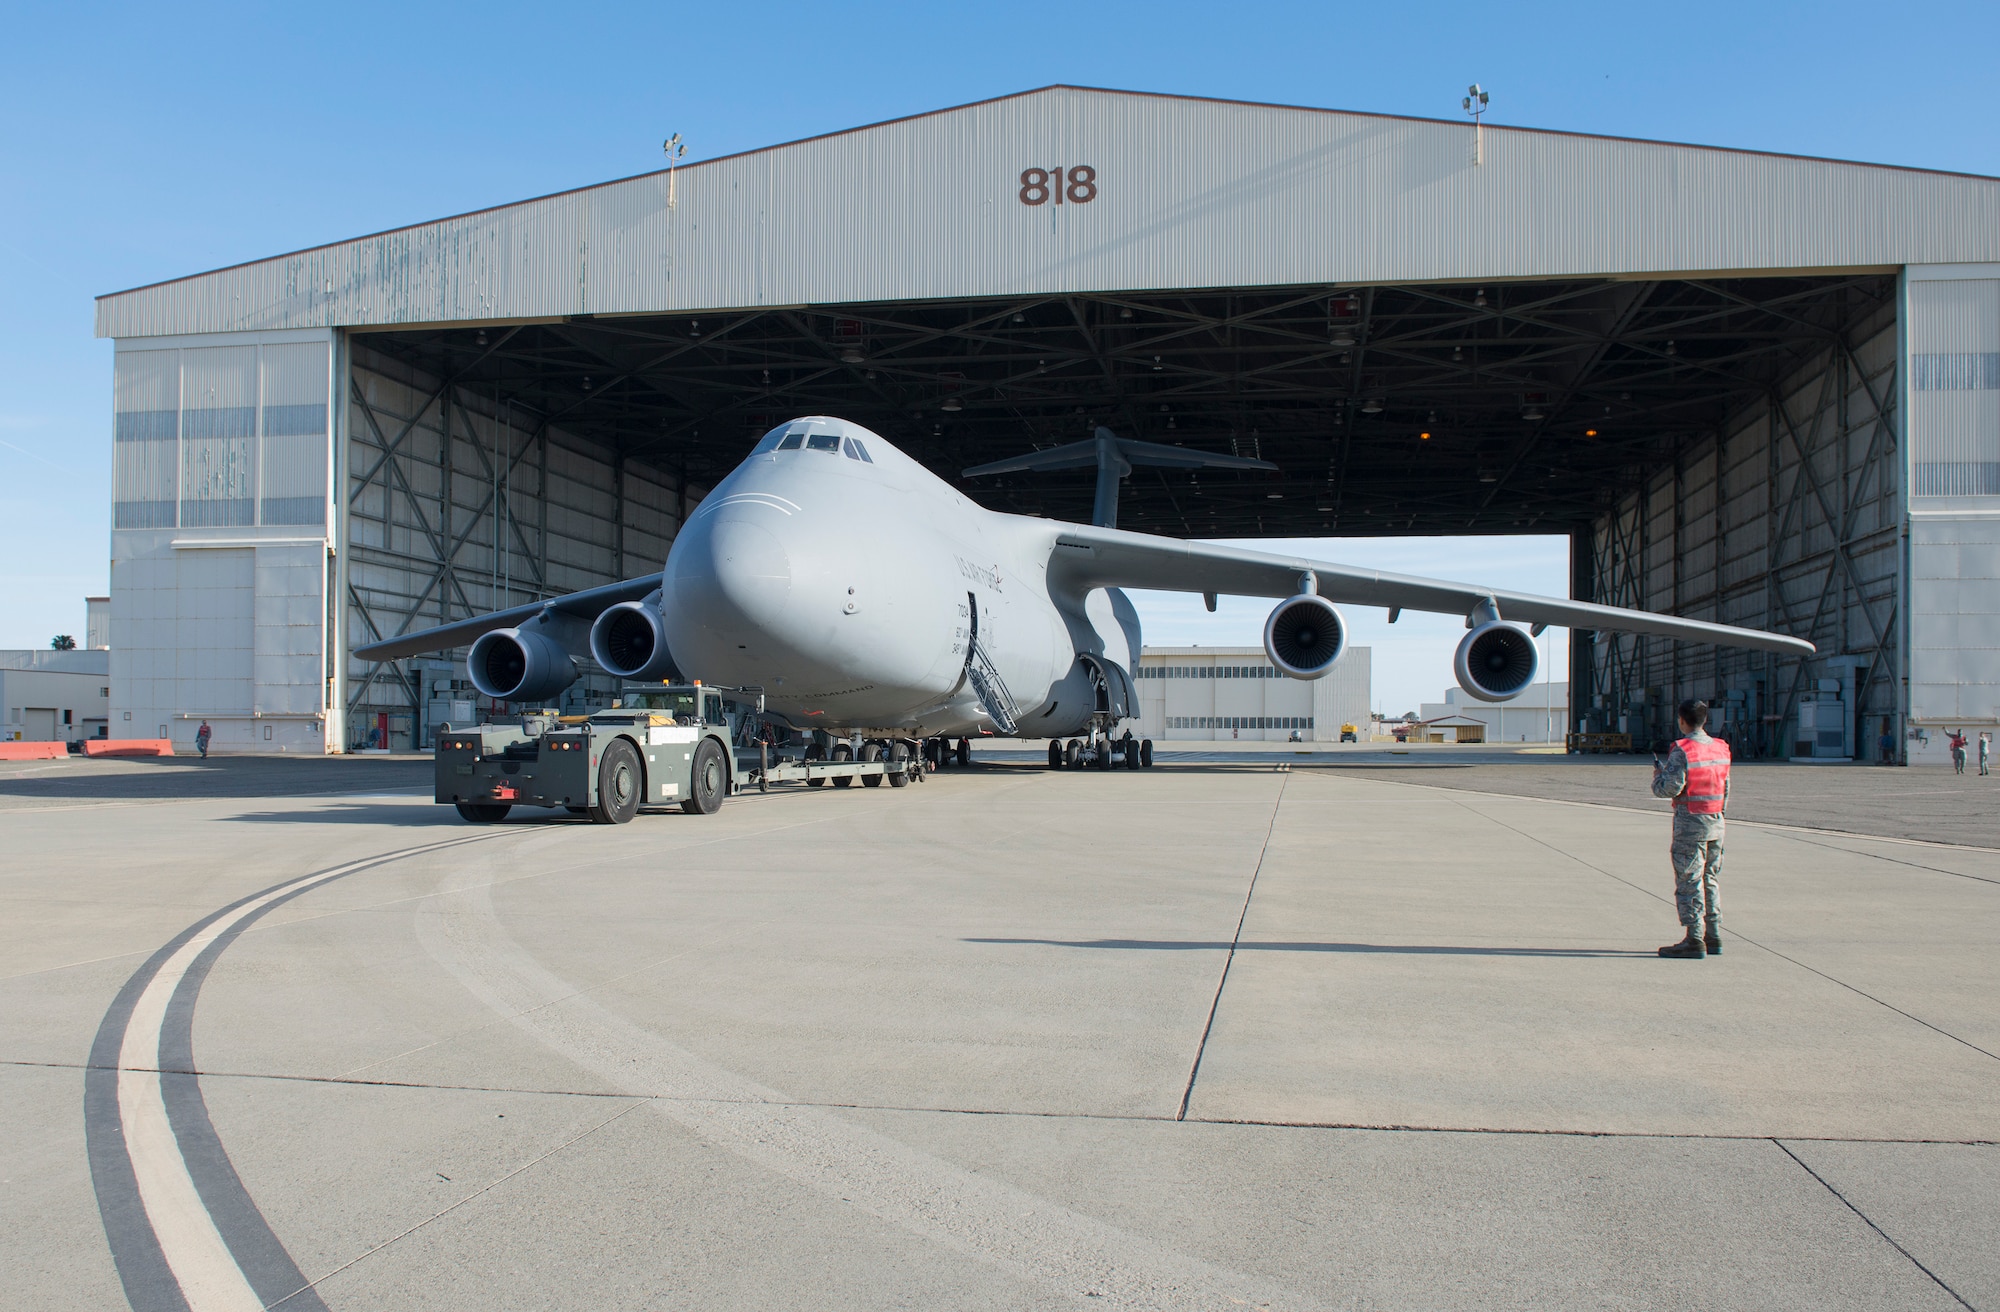 A man stands in front of a C-5, a very large aircraft.